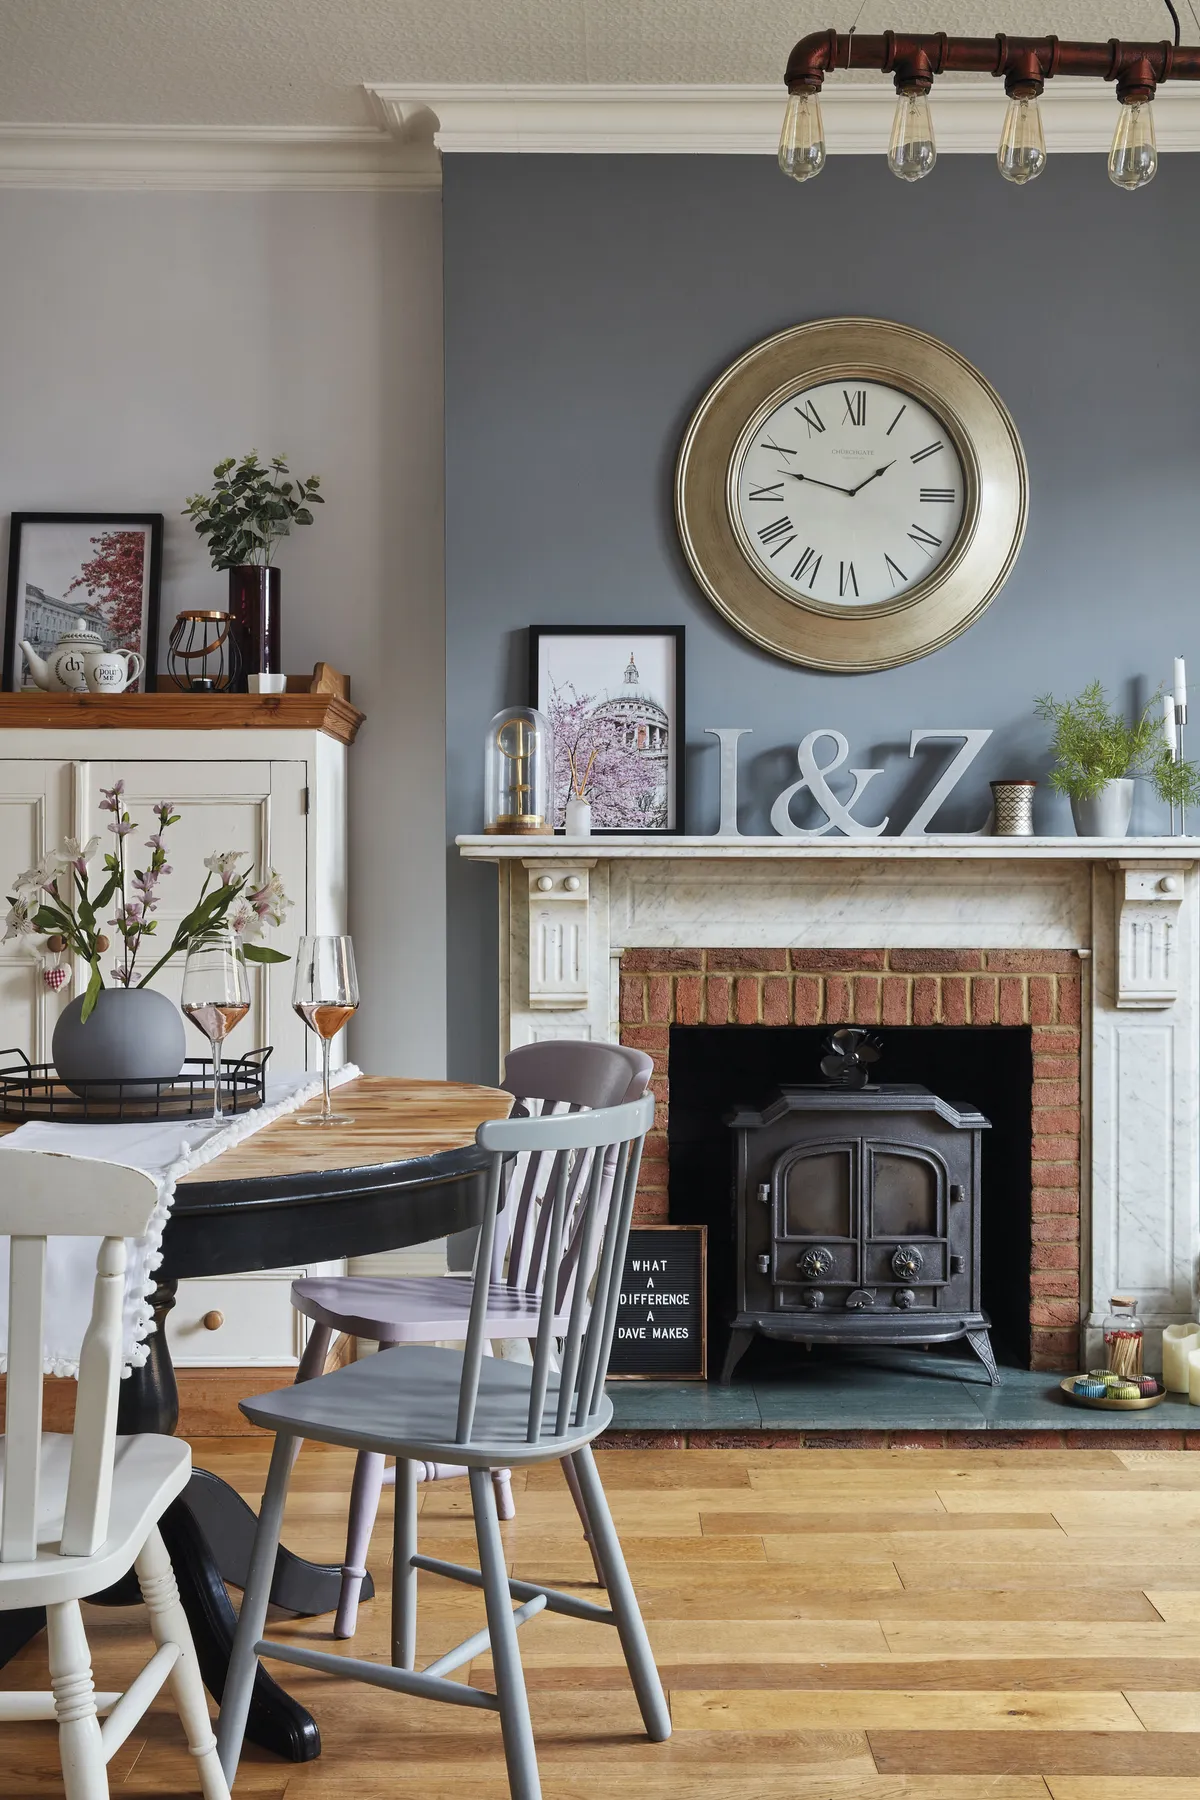 The dining table is one of Sharon’s many upcycling projects, which she painted in black Rust-Oleum paint. She then turned her attention to the chairs. ‘I used leftover paint from my front door for some of the dining chairs because I wanted to bring more of the lilac colour into my home.’ Above the fireplace hangs an oversized clock from Dunelm